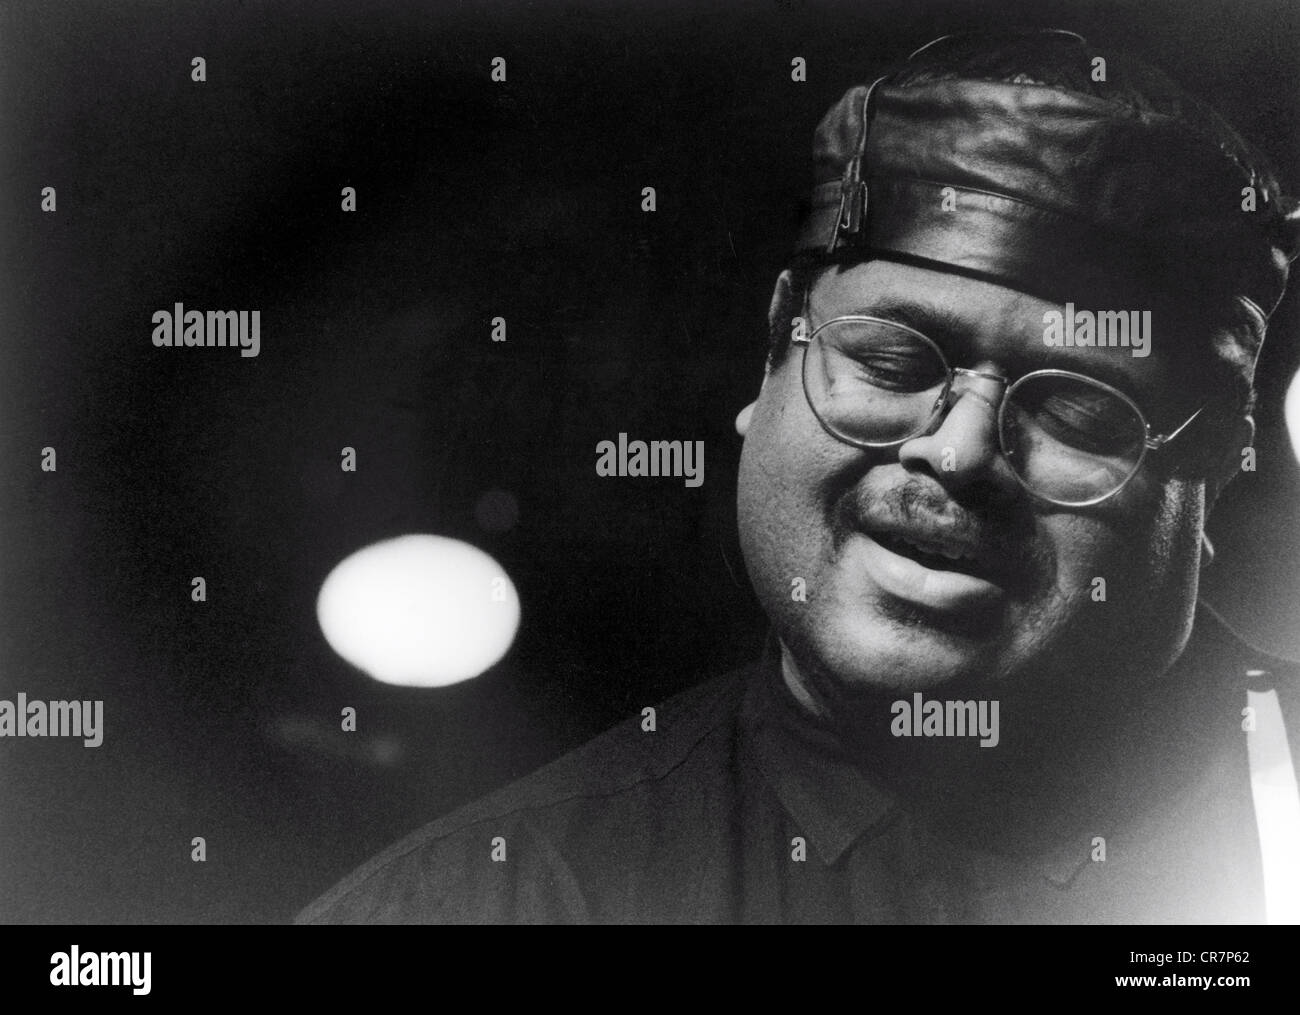 Dolphin, Dwayne, * 7.5.1963, American musician (jazz double bass player), portrait, on stage, Mannheim, 1993, 20th century, jazz musician, double bass player, bassist, leather hat, leather hats, glasses, eyeglasses, moustache, mustache, moustaches, mustaches, , Stock Photo